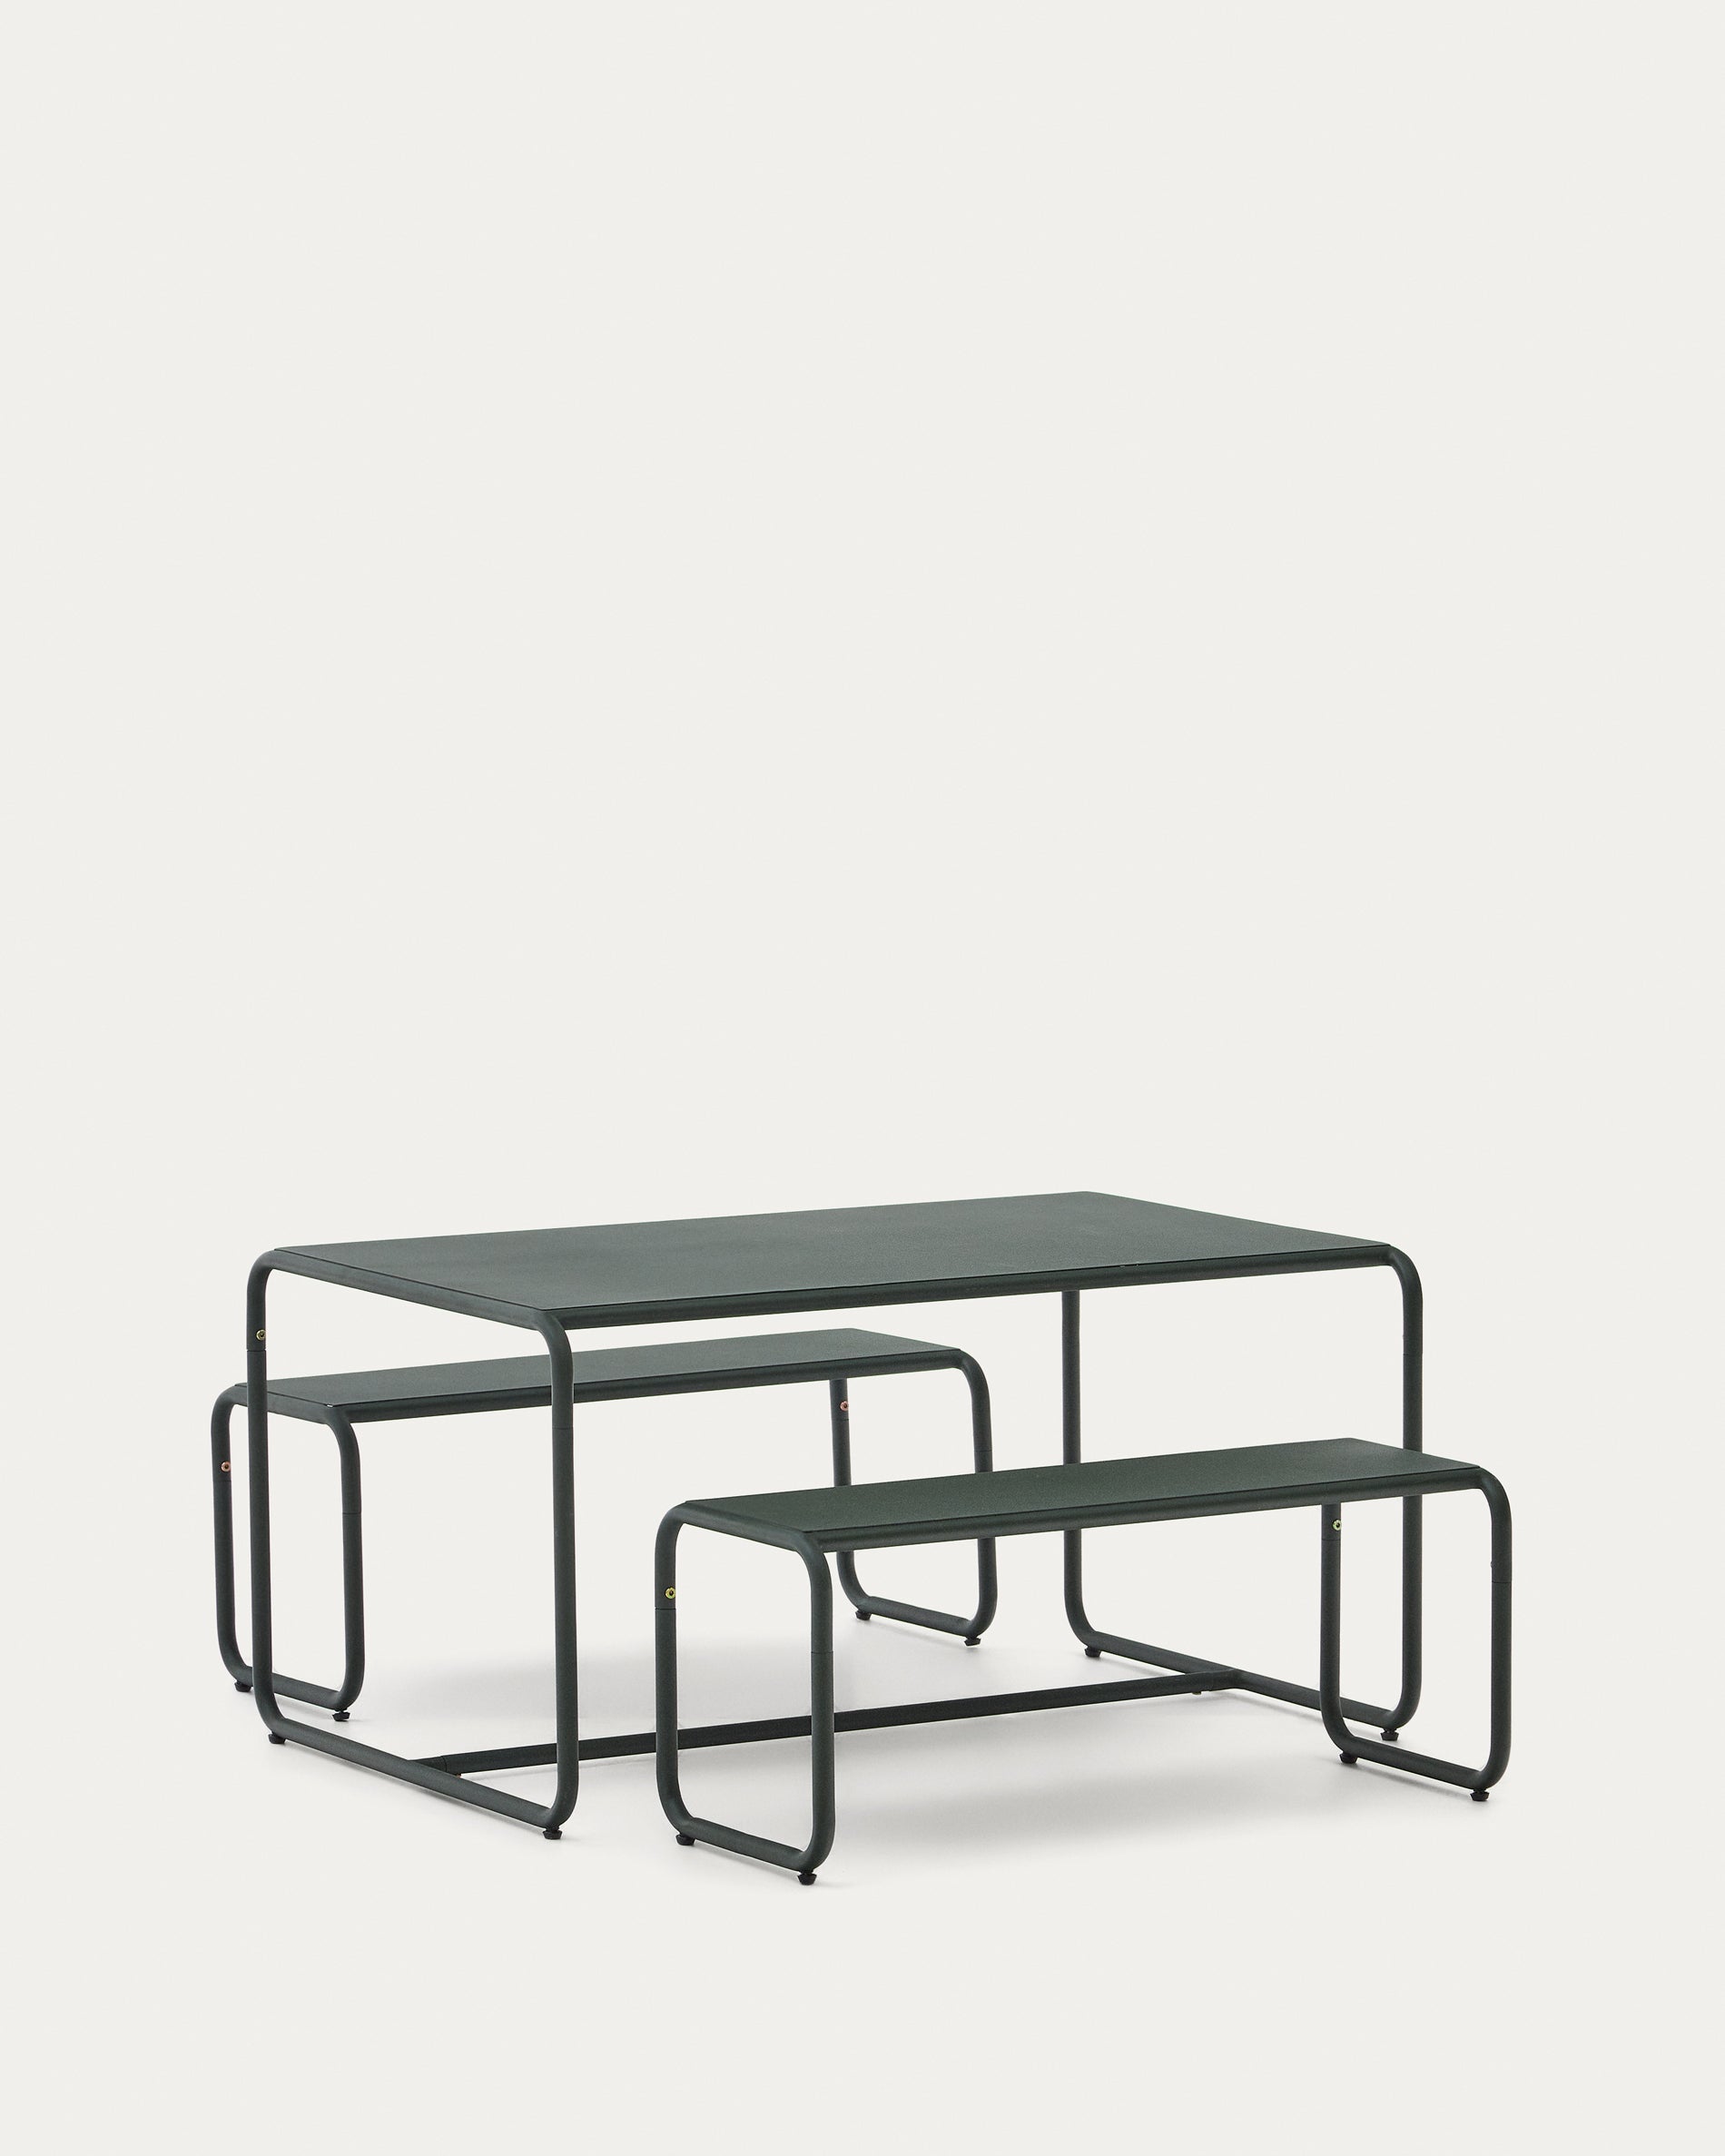 Sotil children's set 2 benches and galvanized steel table with green coating 95 x 62 cm